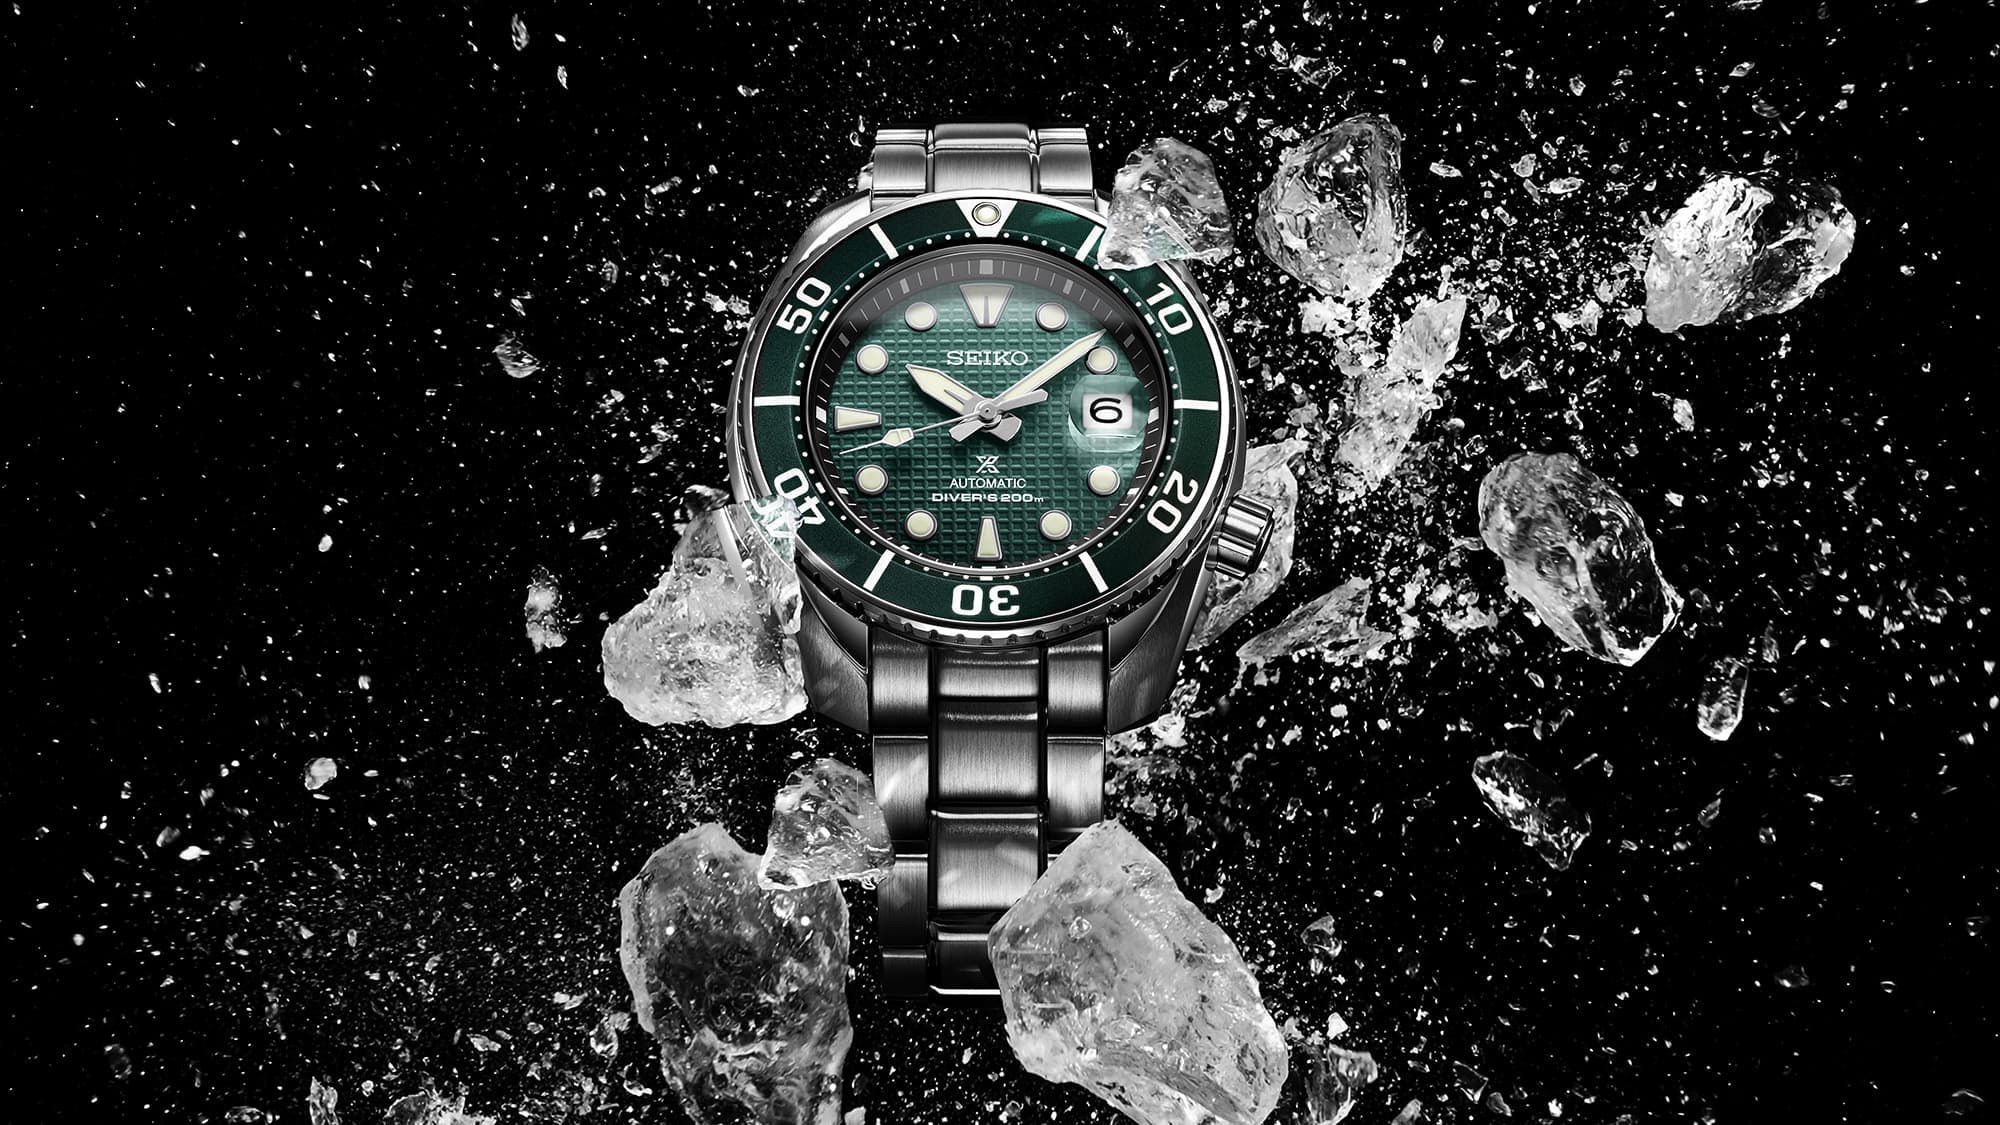 Seiko's new Built For The Ice Diver